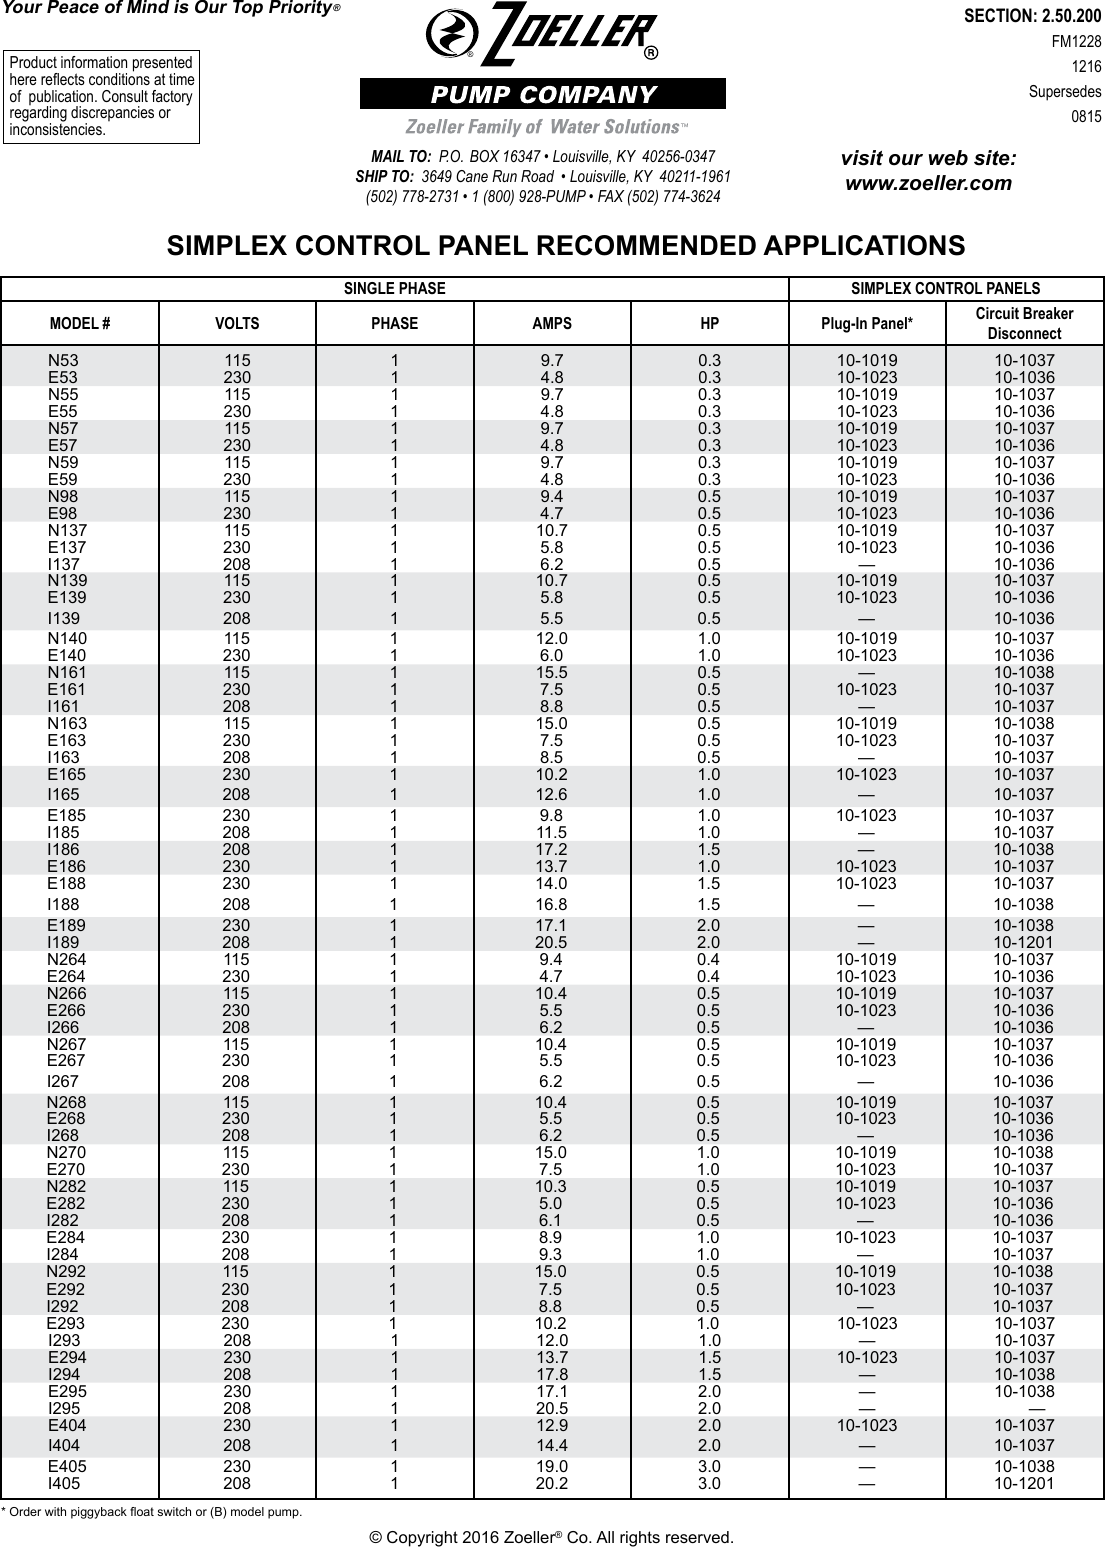 Page 1 of 2 - 548044 3 Zoeller Simplex Control Panel Sizing Chart